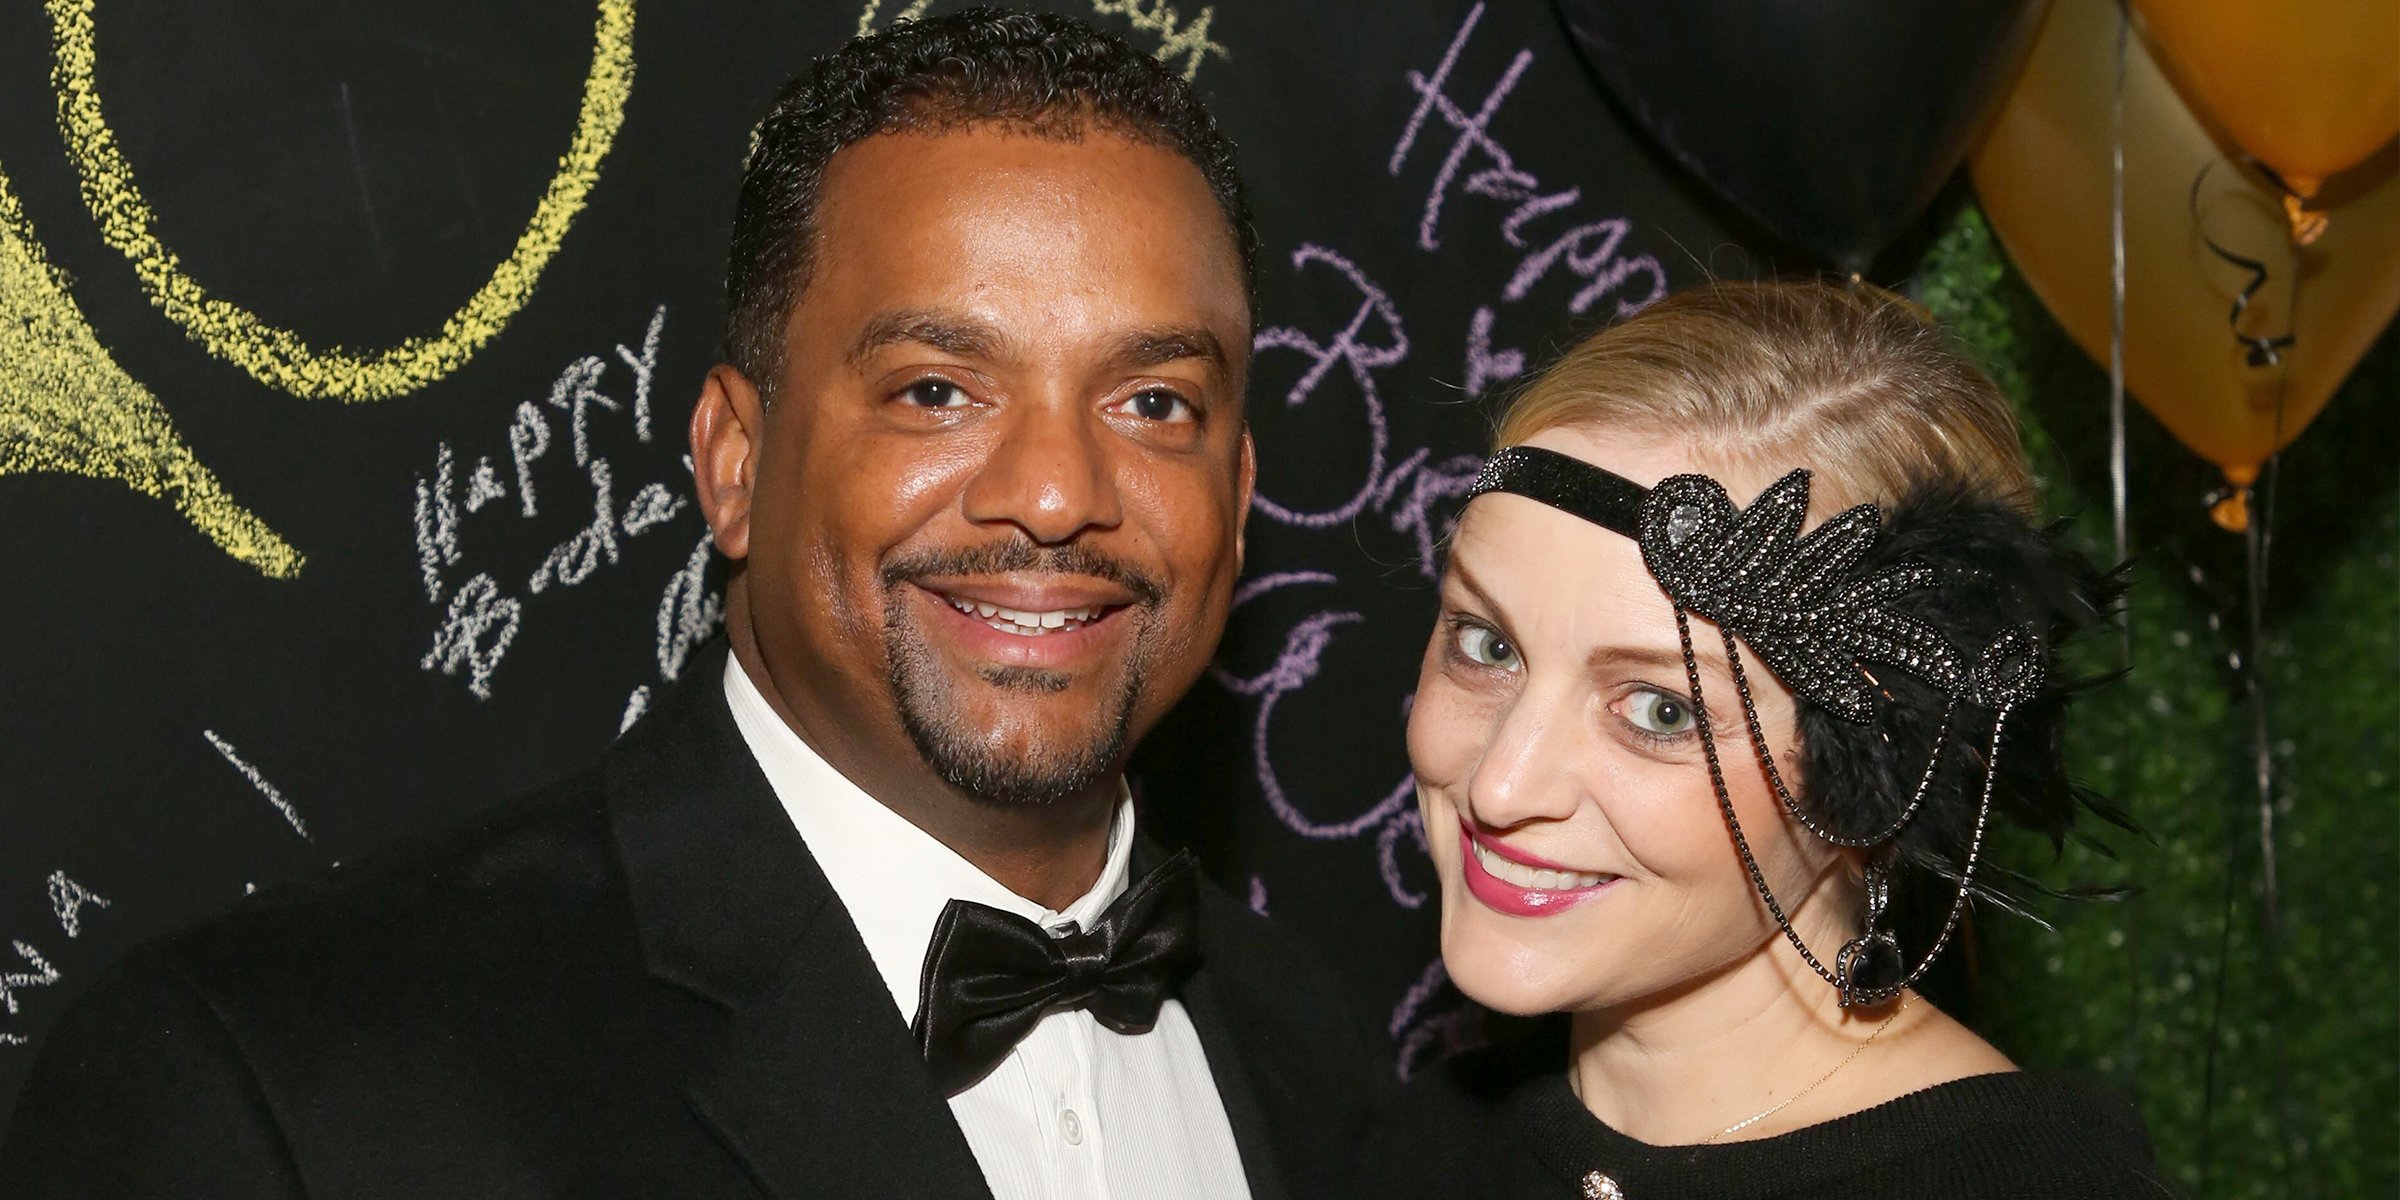 Alfonso Ribeiro and his wife Angela Unkrich. | Source: Getty Images